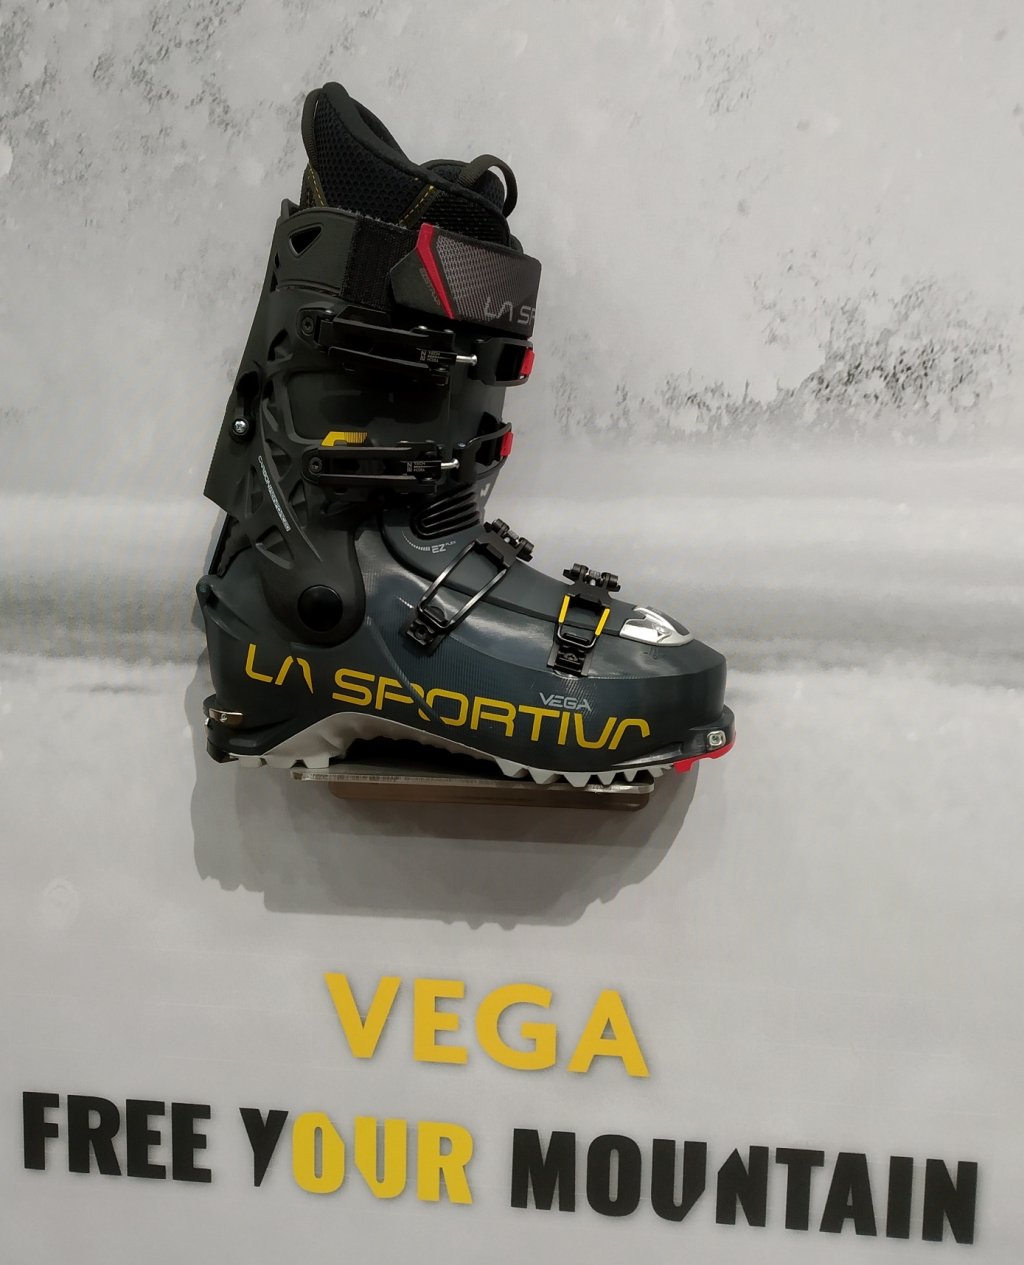 The Vega is the new top model from La Sportiva